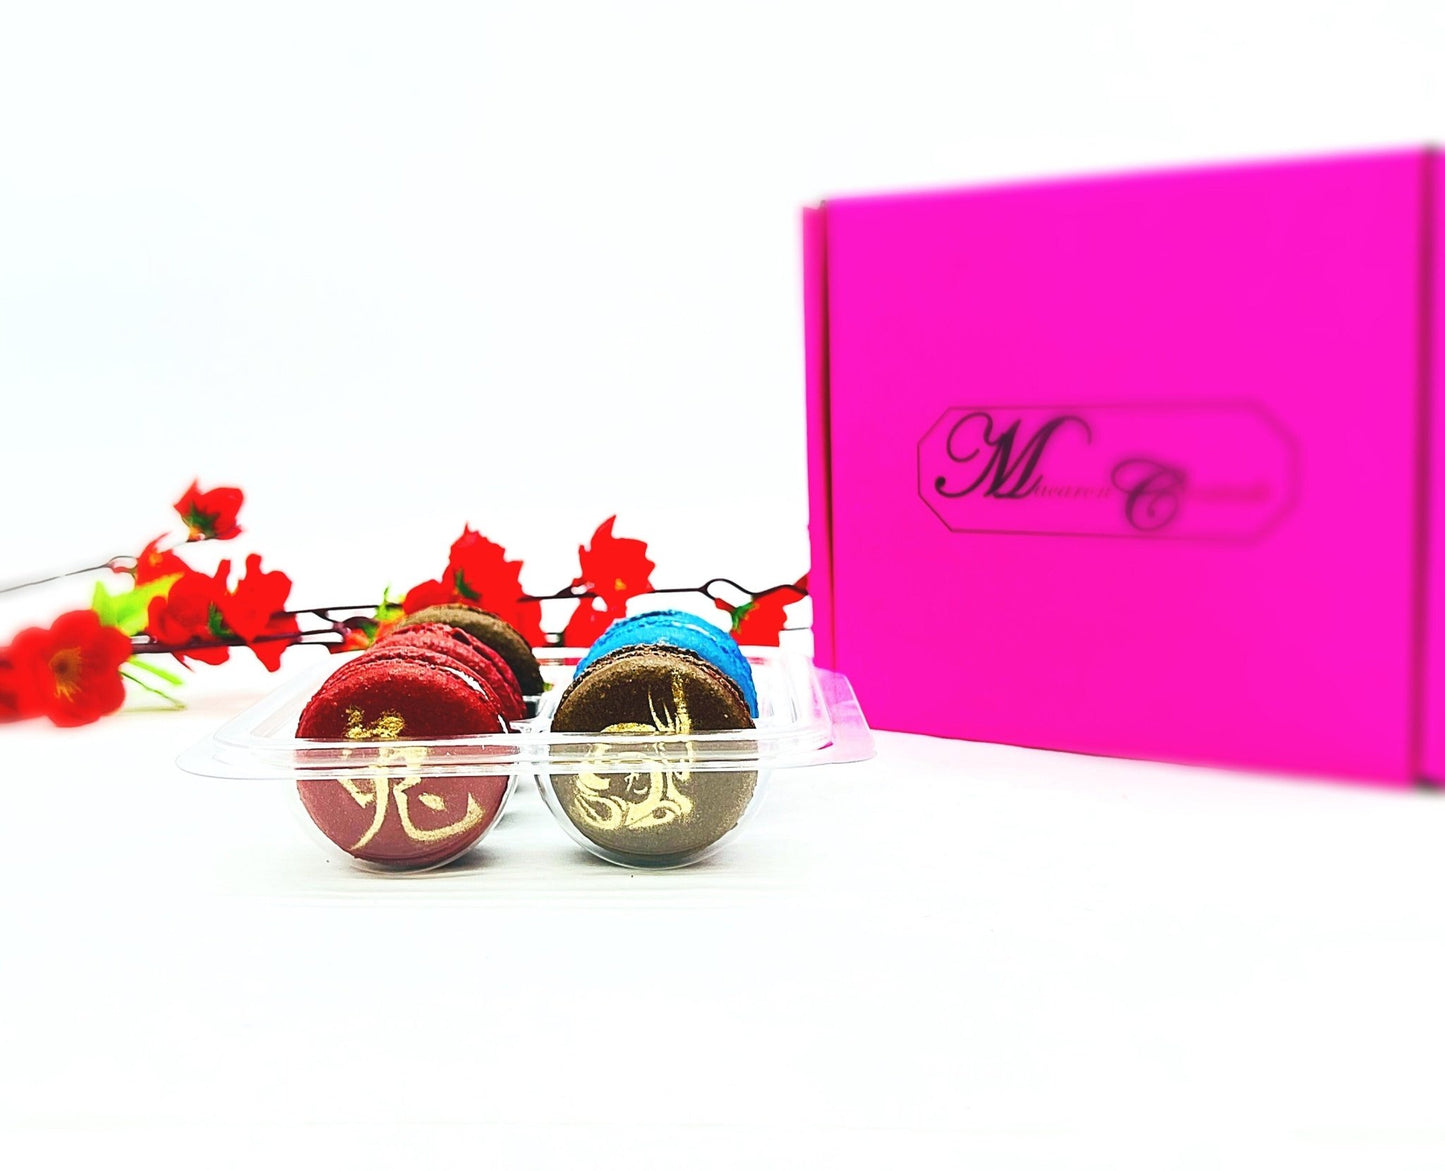 Year of The Rabbit | Assorted French Macaron decorated with Gold Dust - Macaron CentraleVariety6 Pack